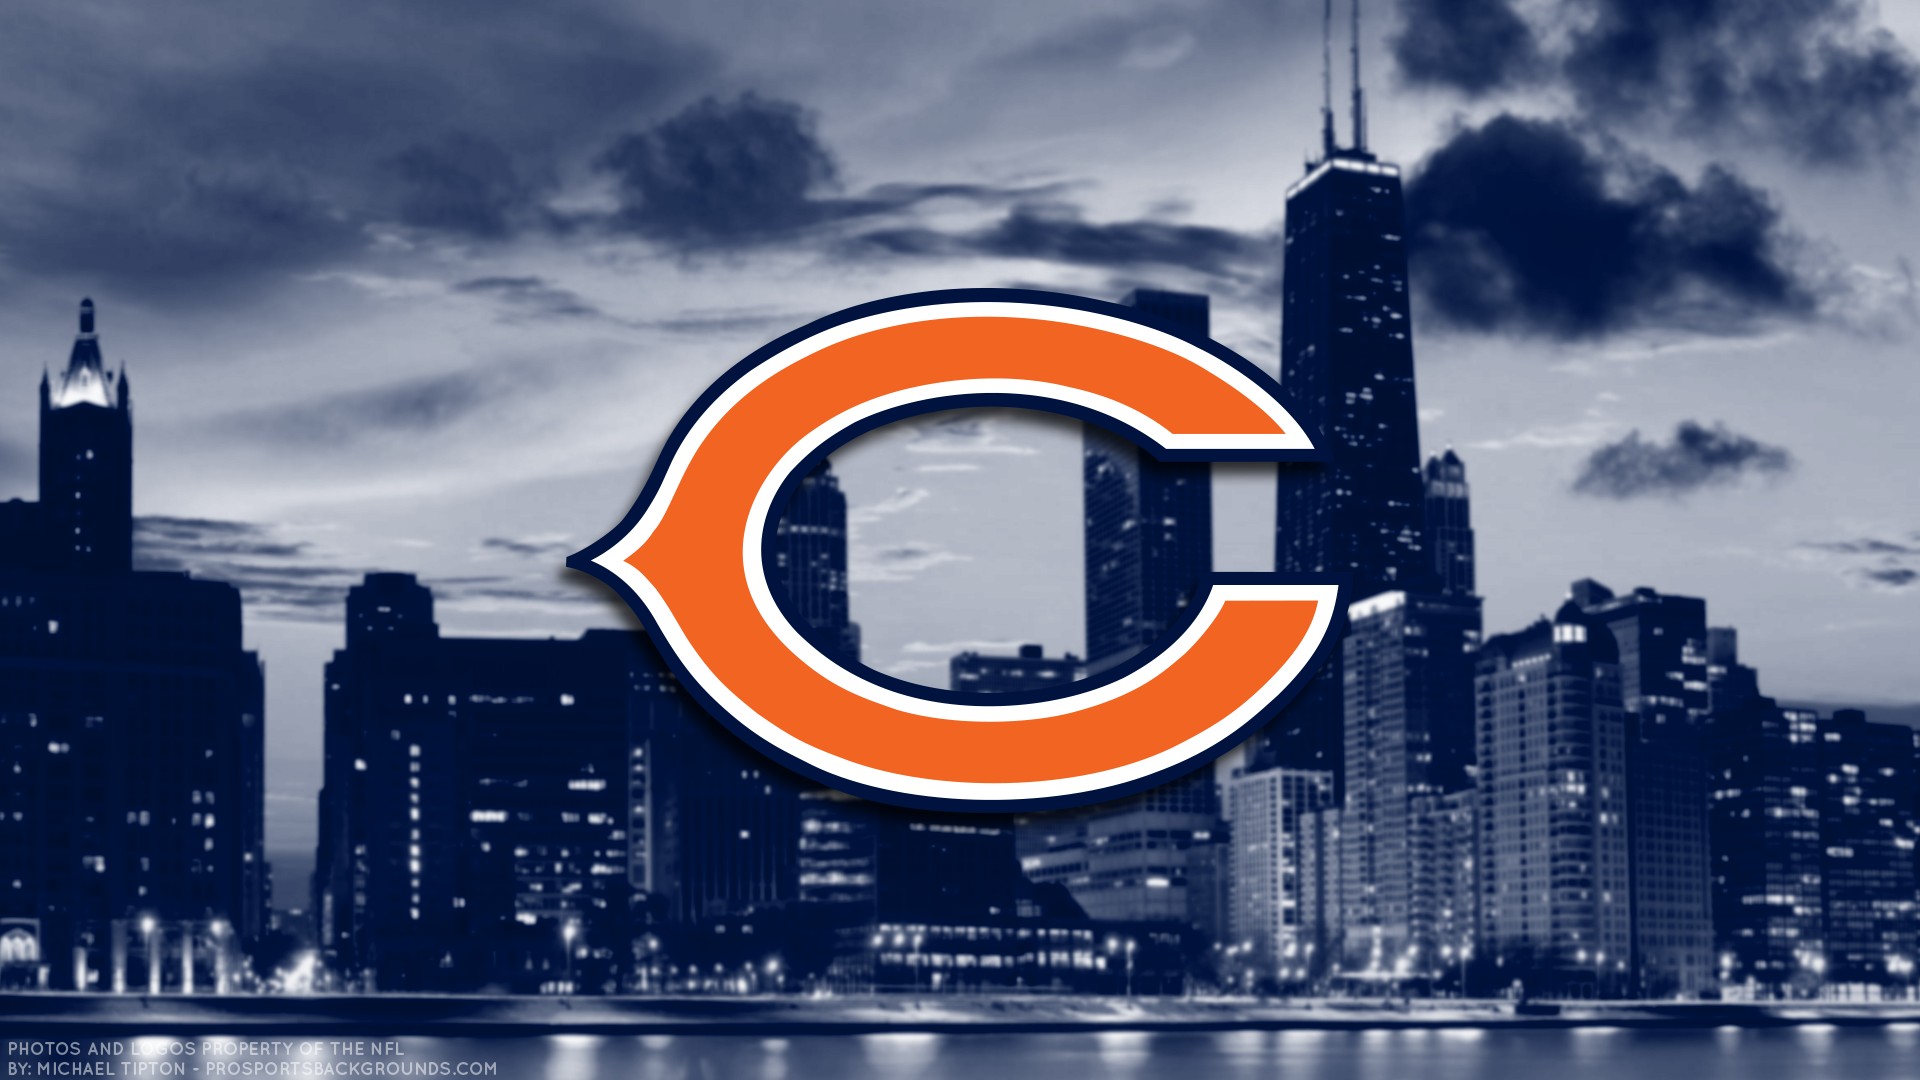 Chicago Bears NFL HD Wallpapers With high-resolution 1920X1080 pixel. You can use this wallpaper for your Mac or Windows Desktop Background, iPhone, Android or Tablet and another Smartphone device